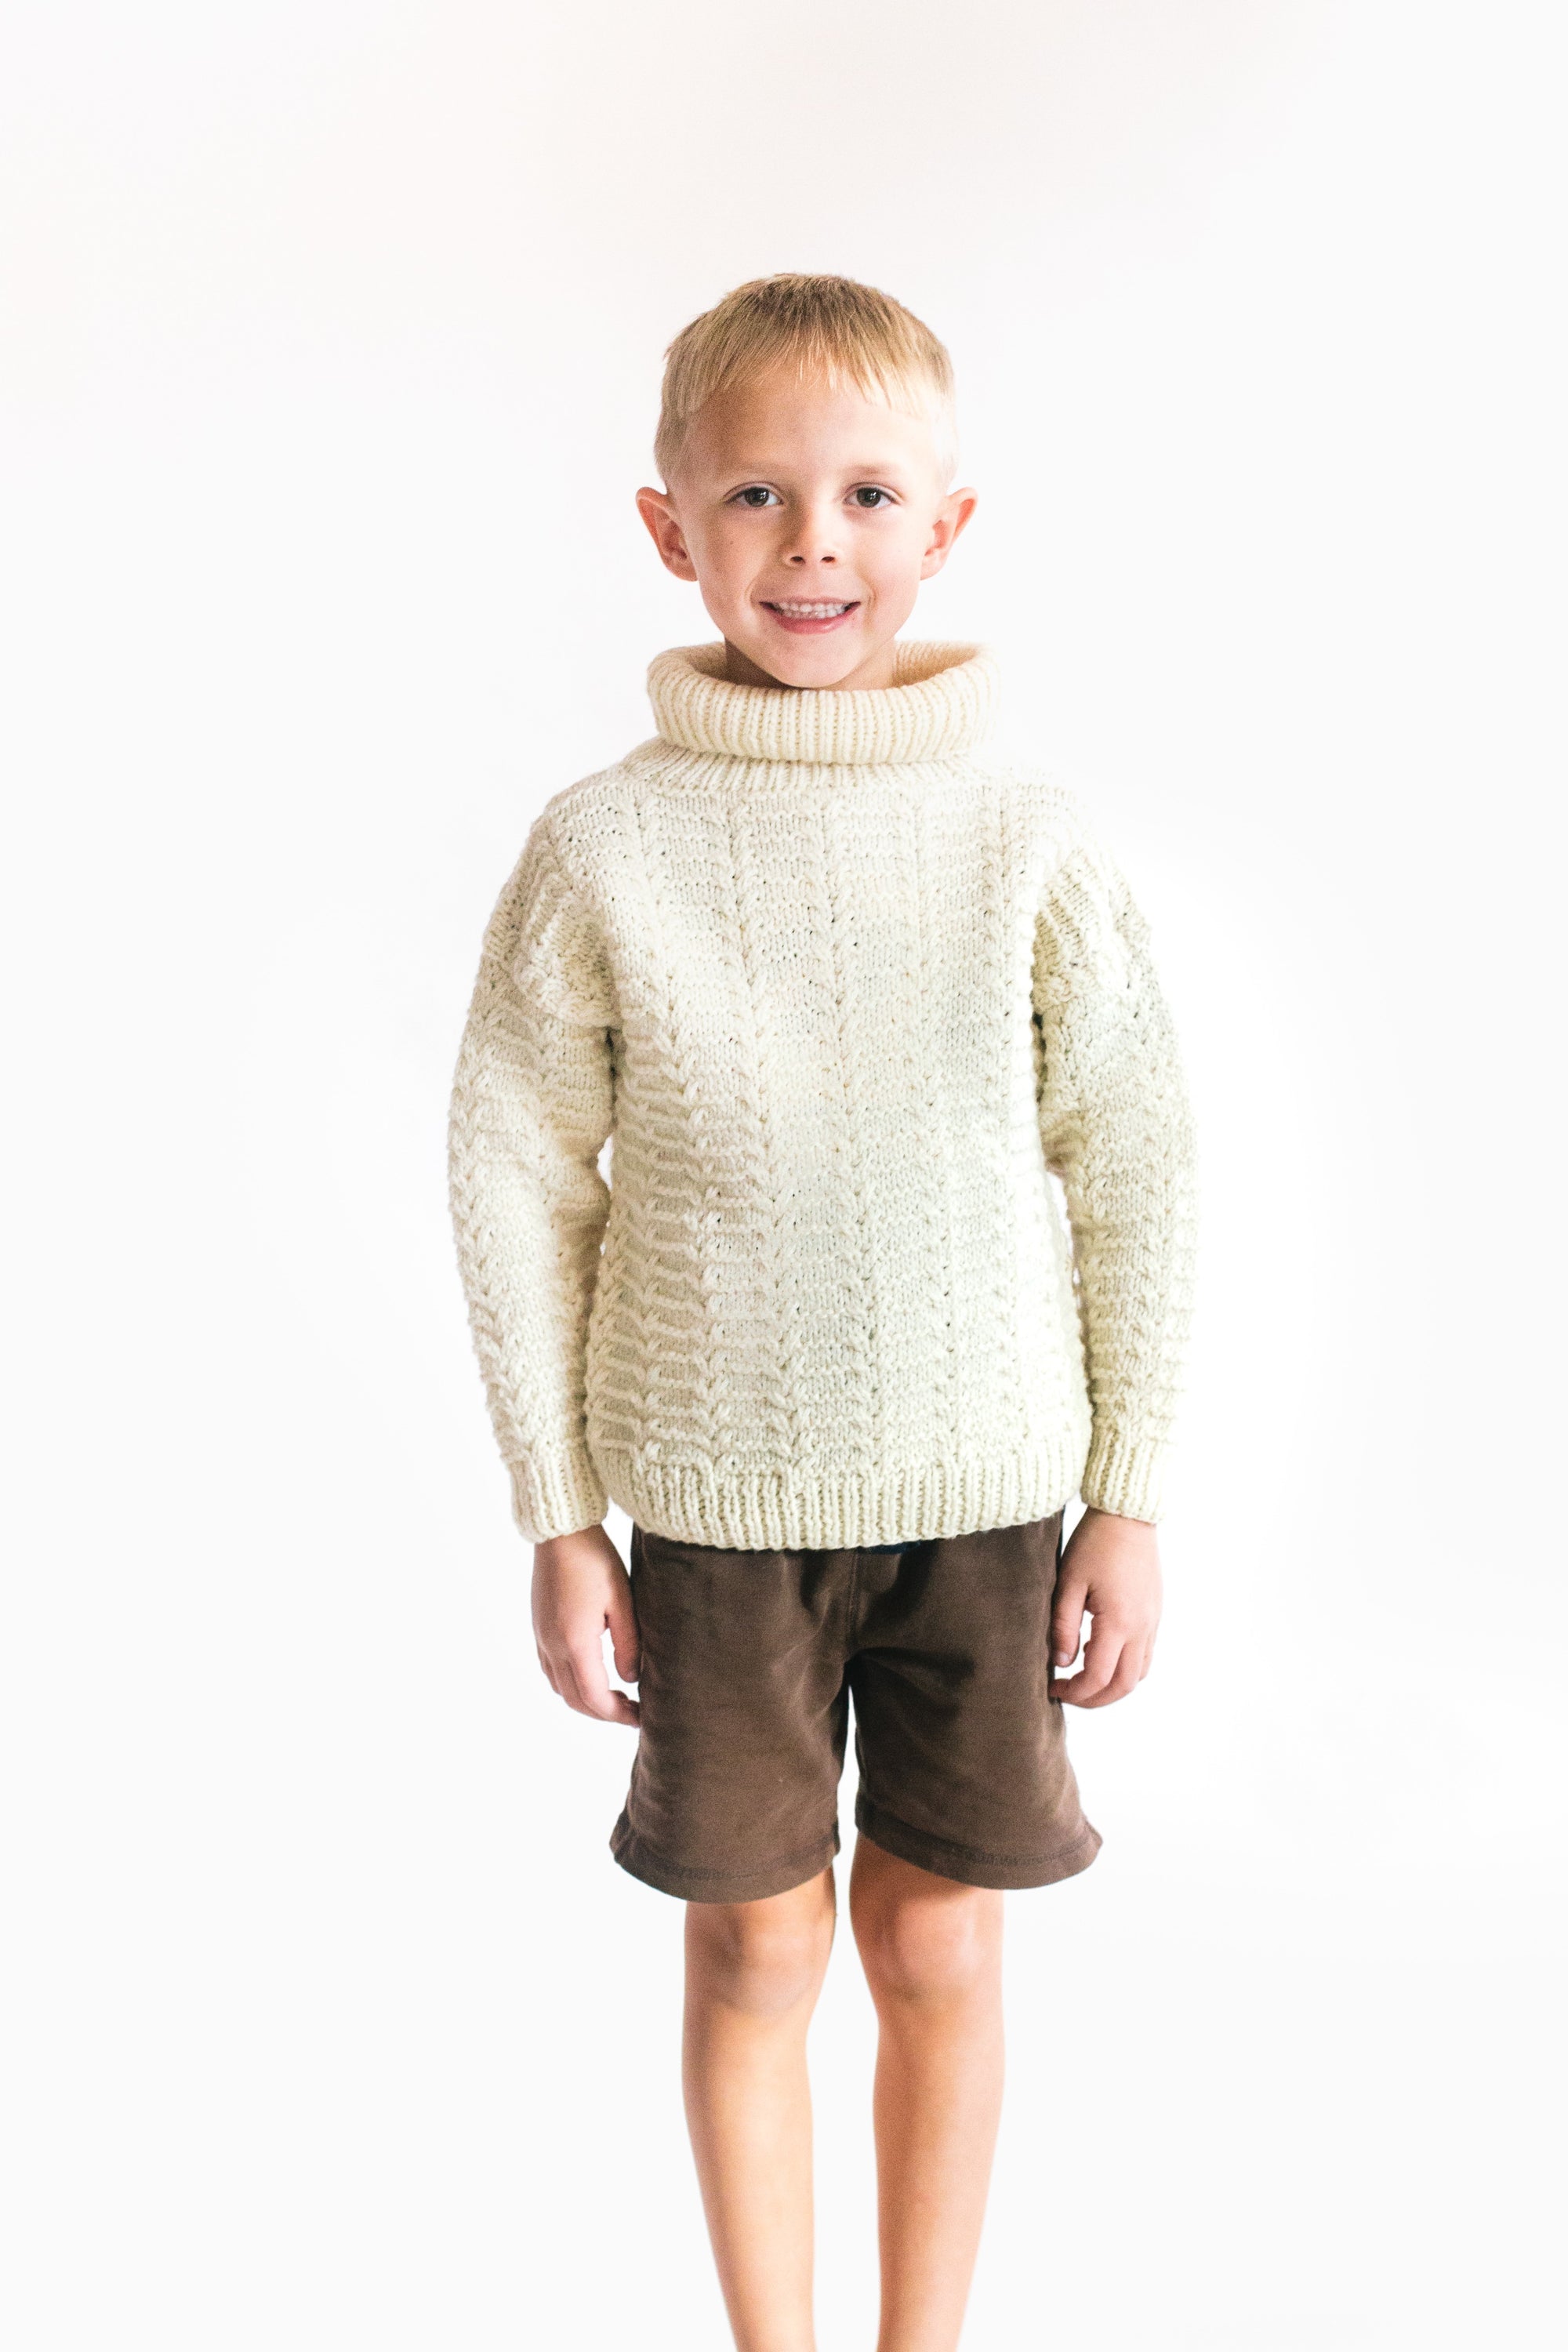 Boy wearing a cream colored hand knit sweater with a rolled neck, and brown shorts.  Standing in front of a white backdrop.